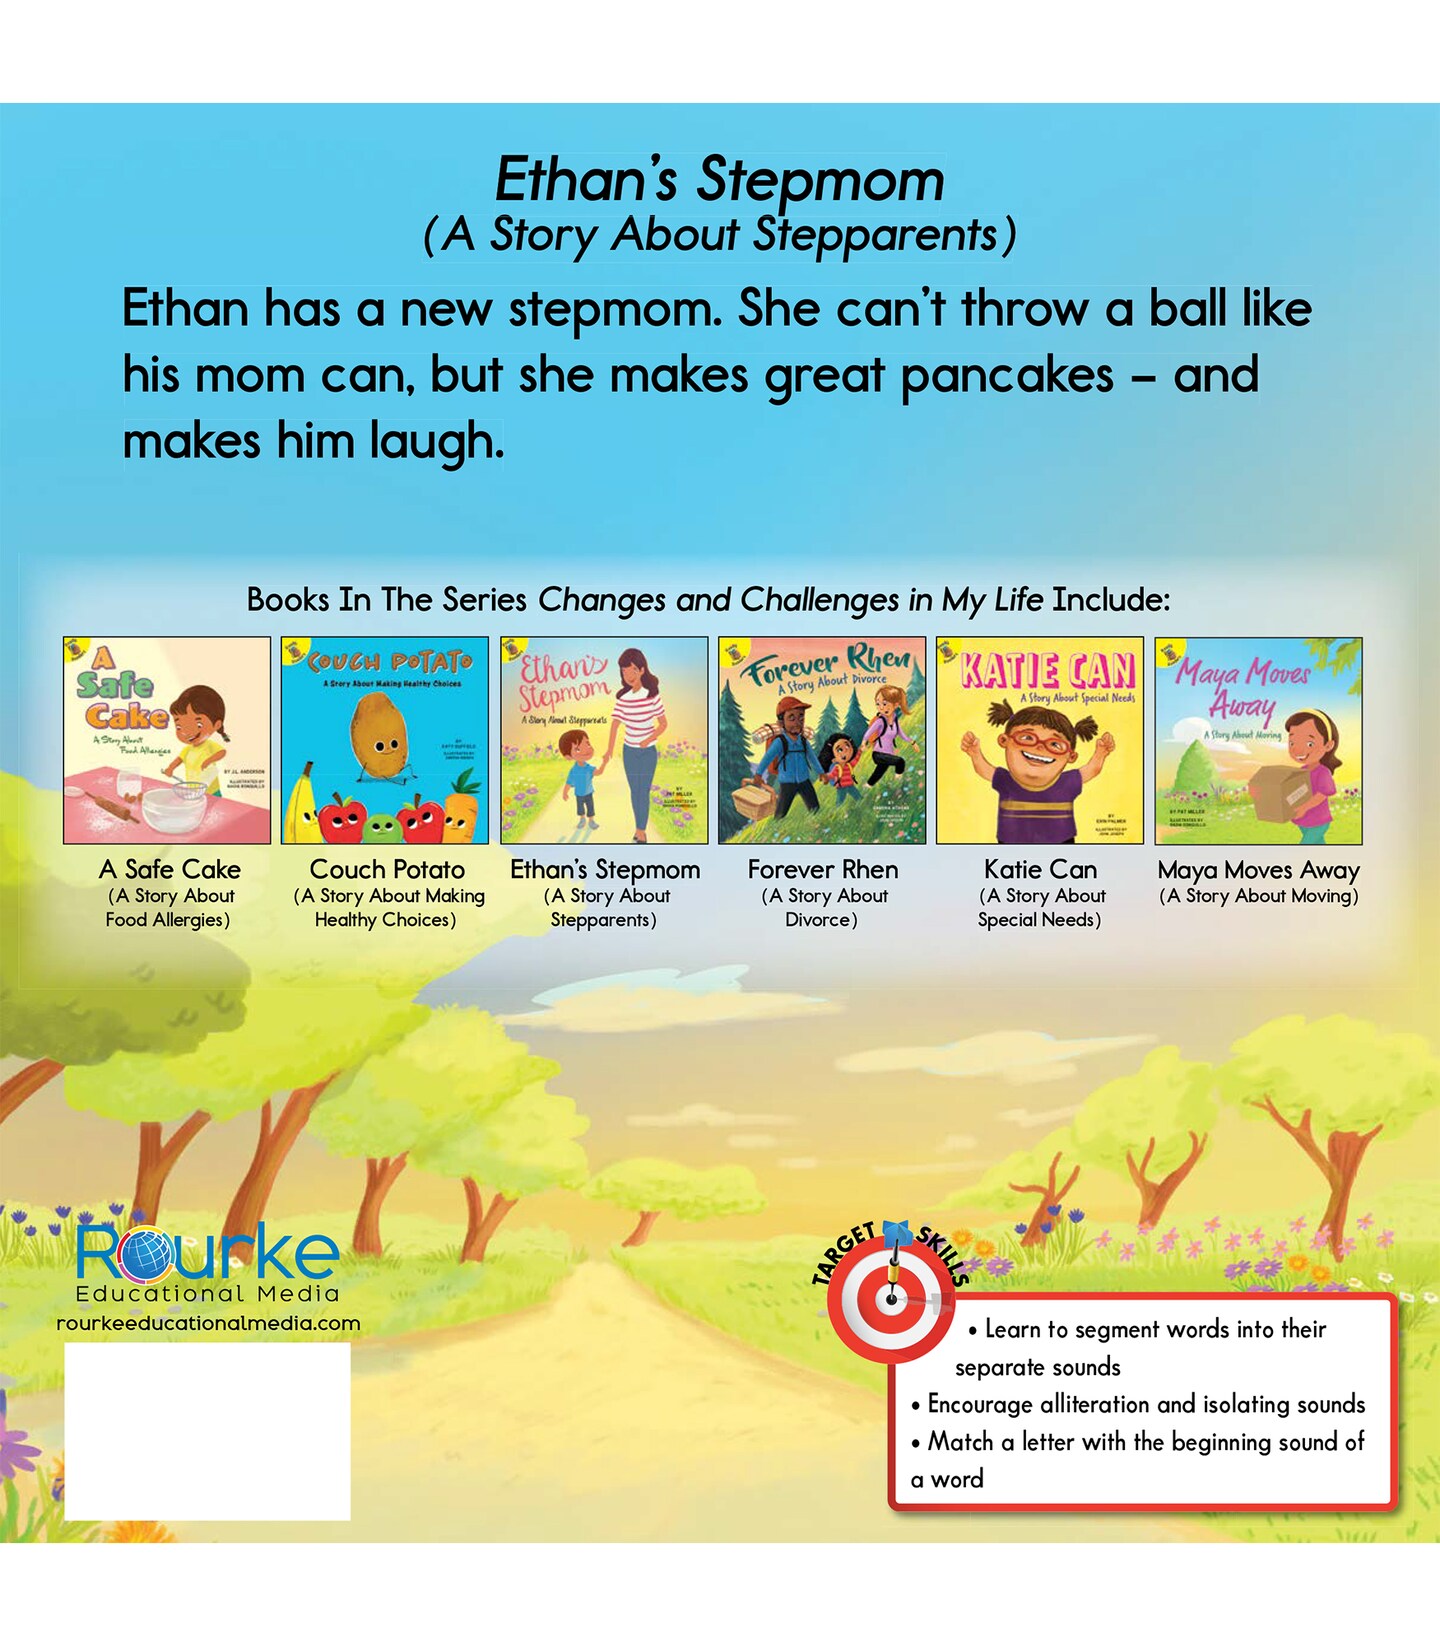 Rourke Educational Media Ethan&#x27;s Stepmom: A Story About Stepparents&#x2014;Children&#x27;s Book About Losing a Parent and Remarriage, Kindergarten-2nd Grade (24 pgs) Reader